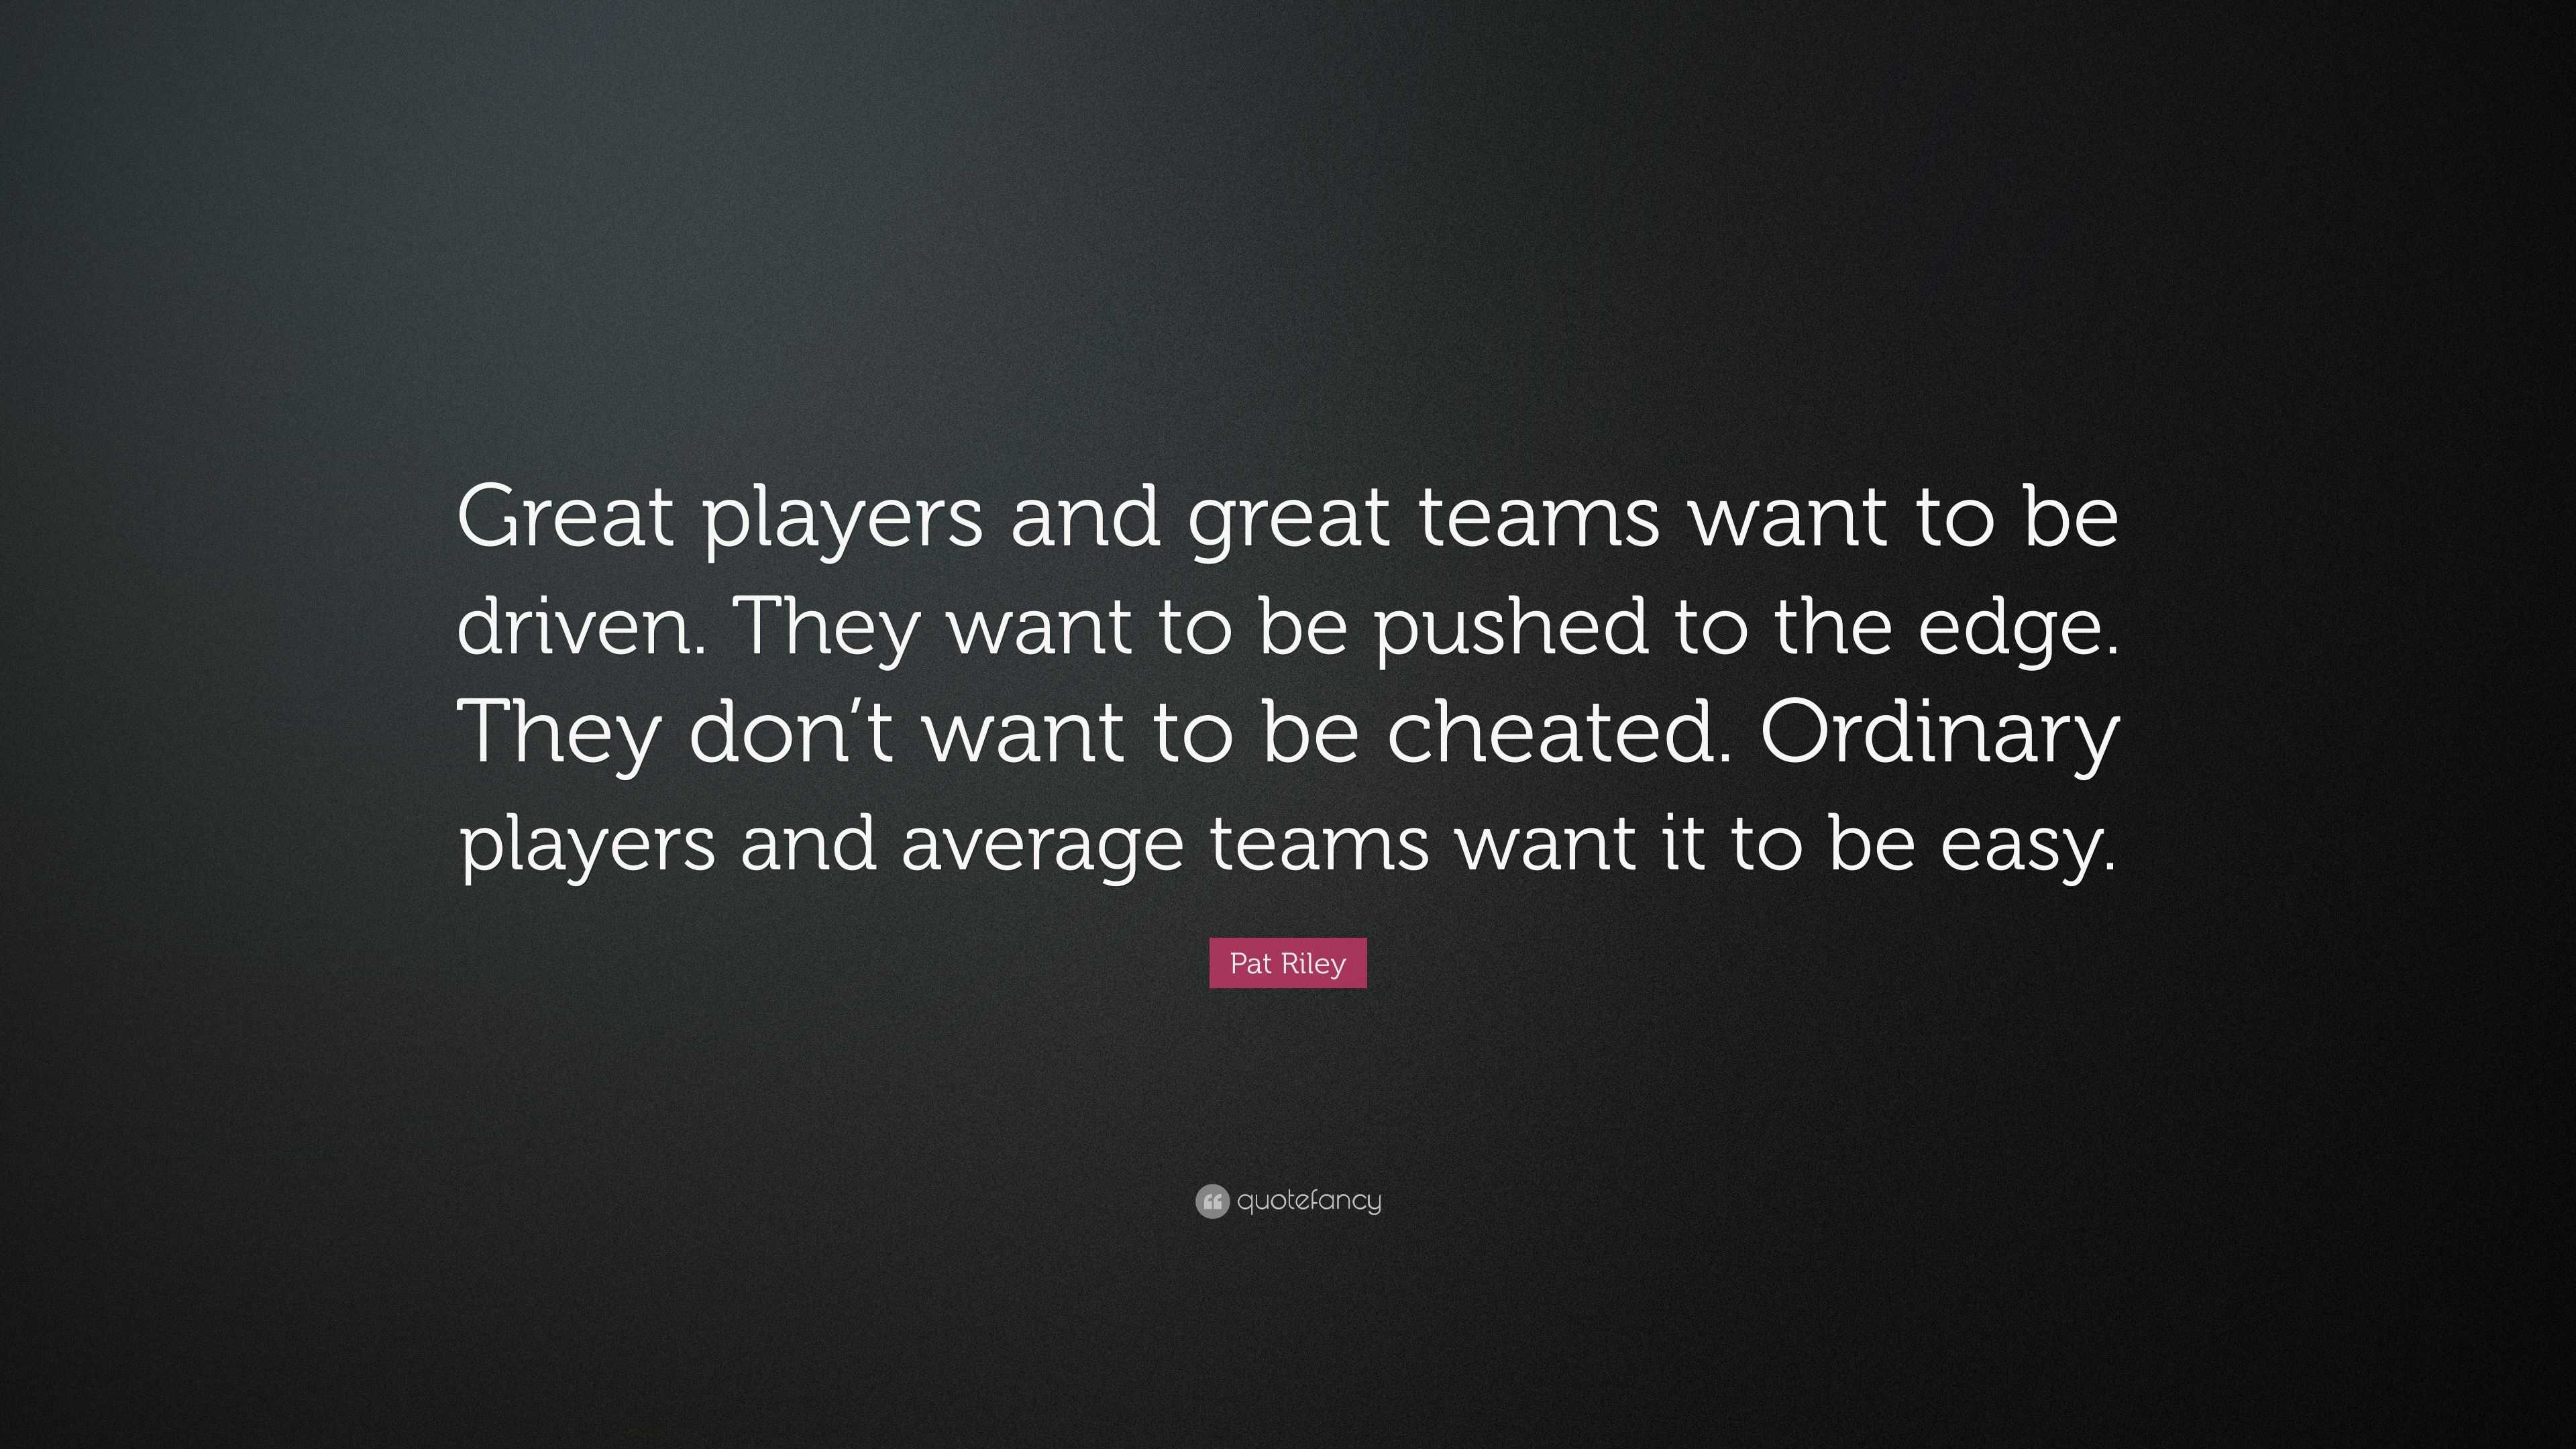 Pat Riley Quote: “Great players and great teams want to be driven. They ...